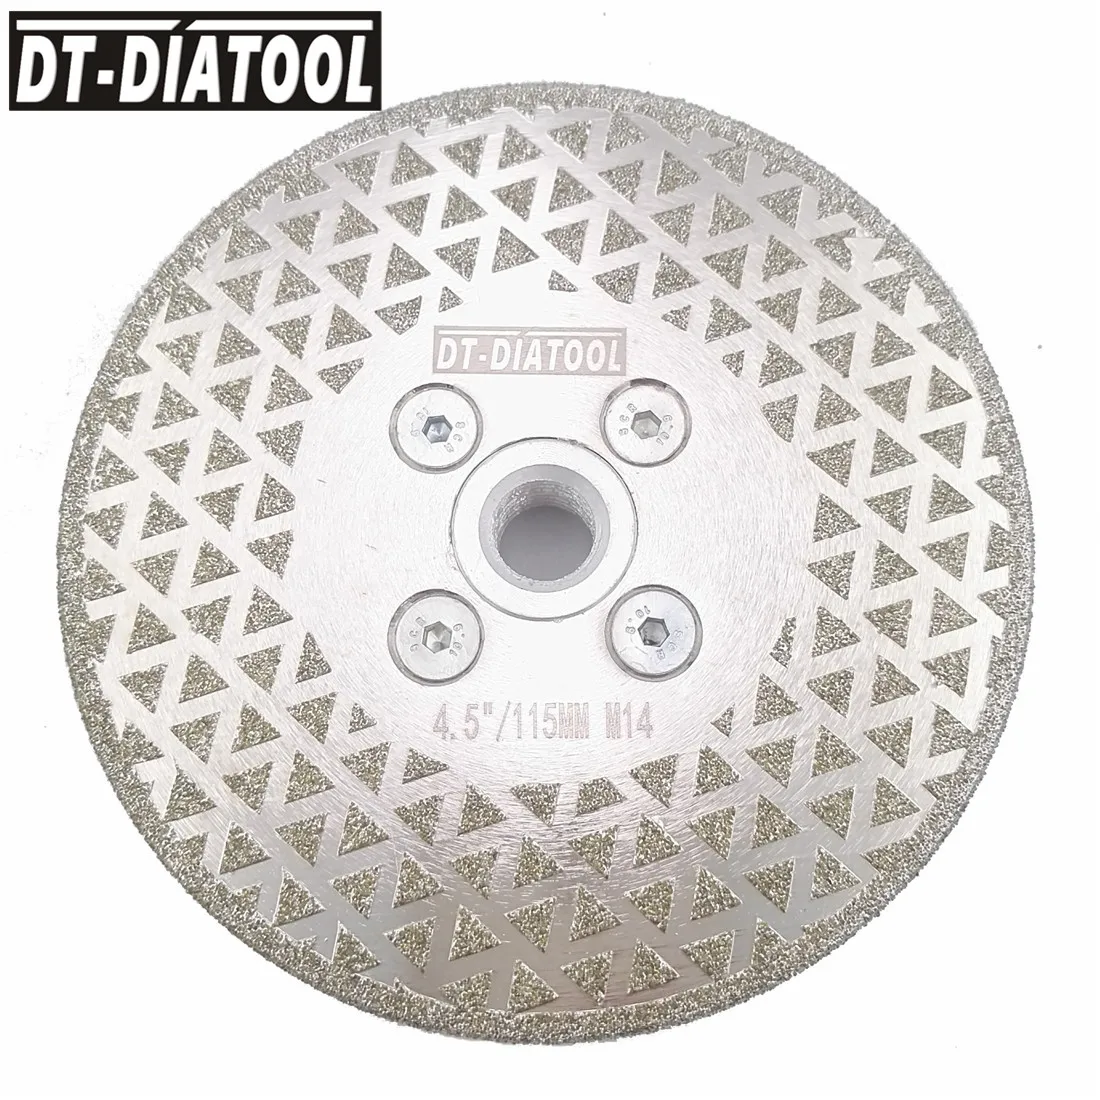 

DT-DIATOOL 1pc Electroplated Diamond Cutting Disc Grinding Wheel Both Side Coated Saw Blade for Cutting Marble Tile M14 Thread